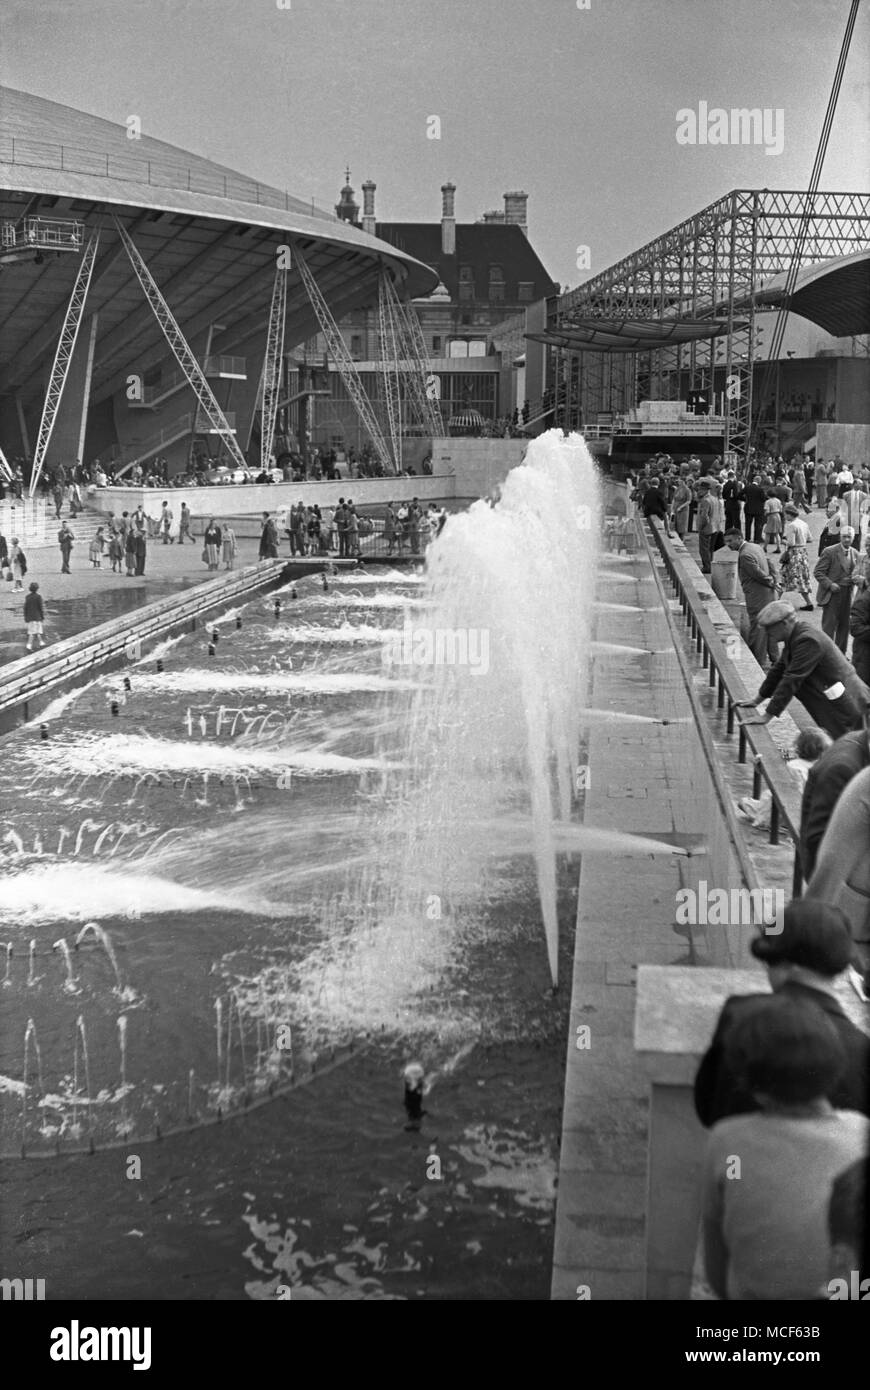 Large pool with multiple fountains, Festival of Britain, London, 1951 Stock Photo